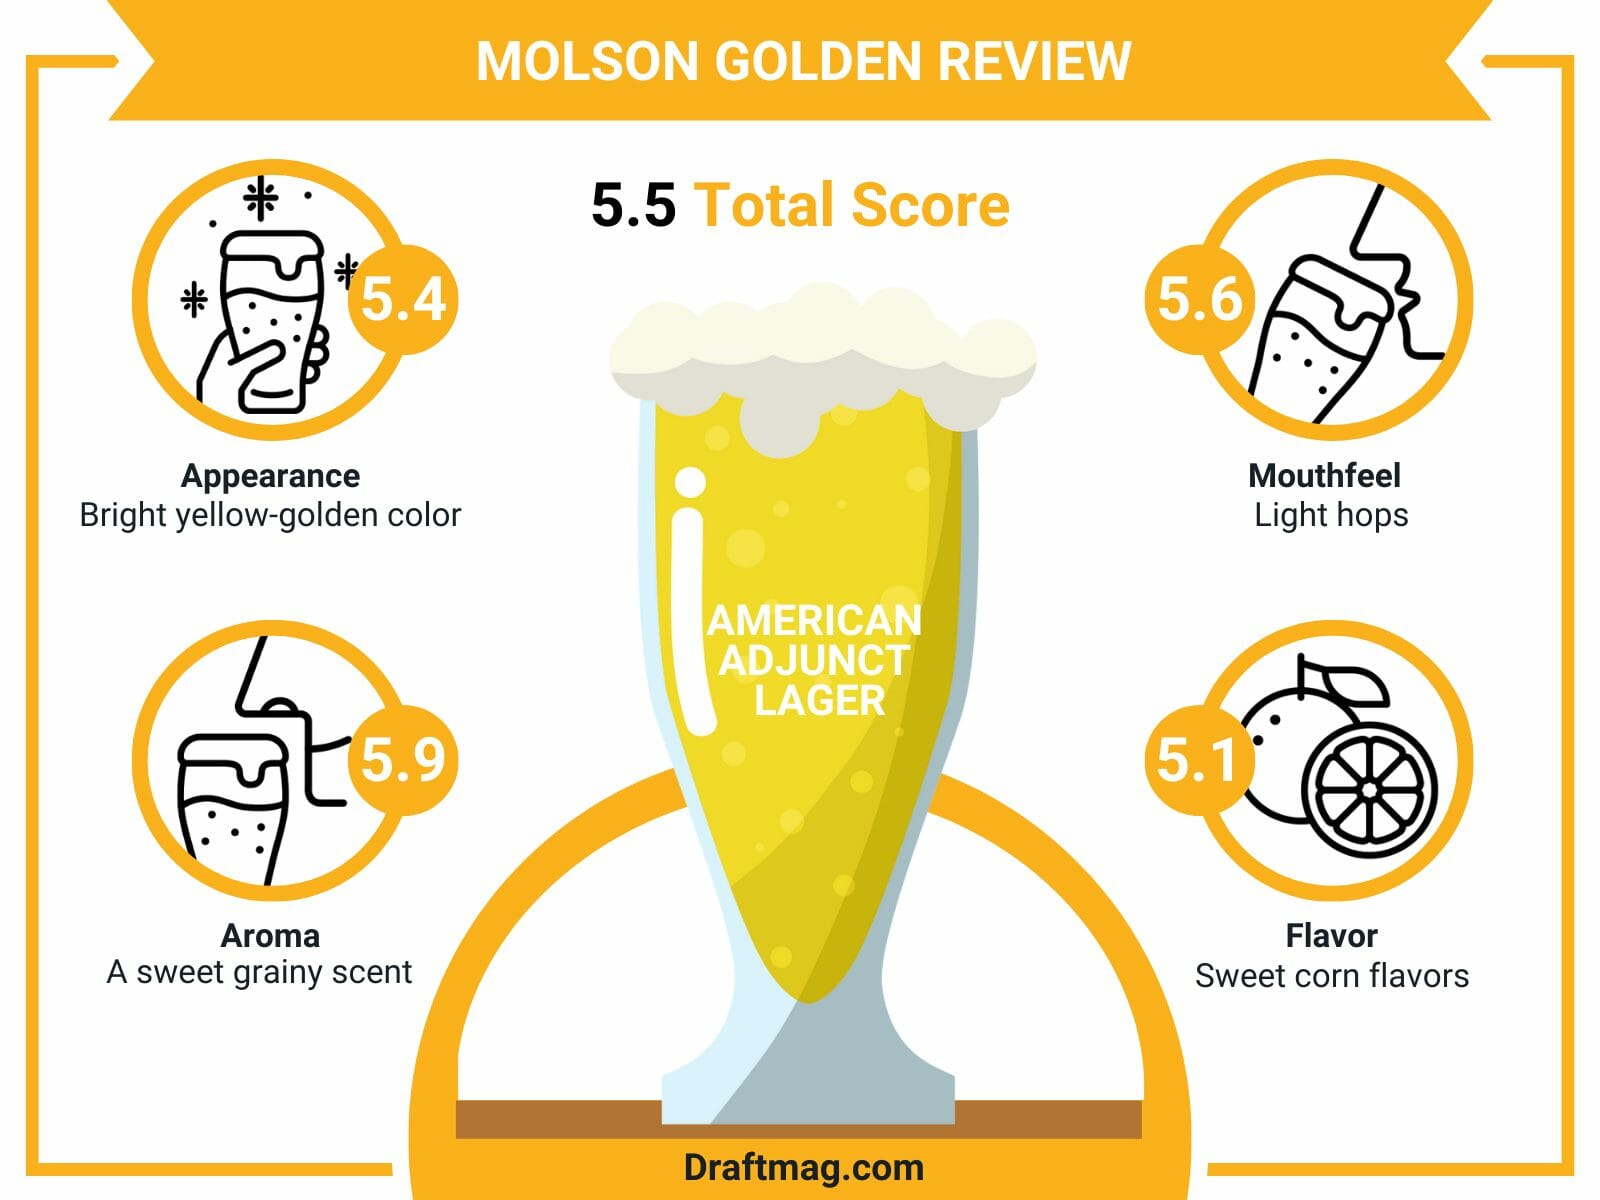 Molson golden review infographic